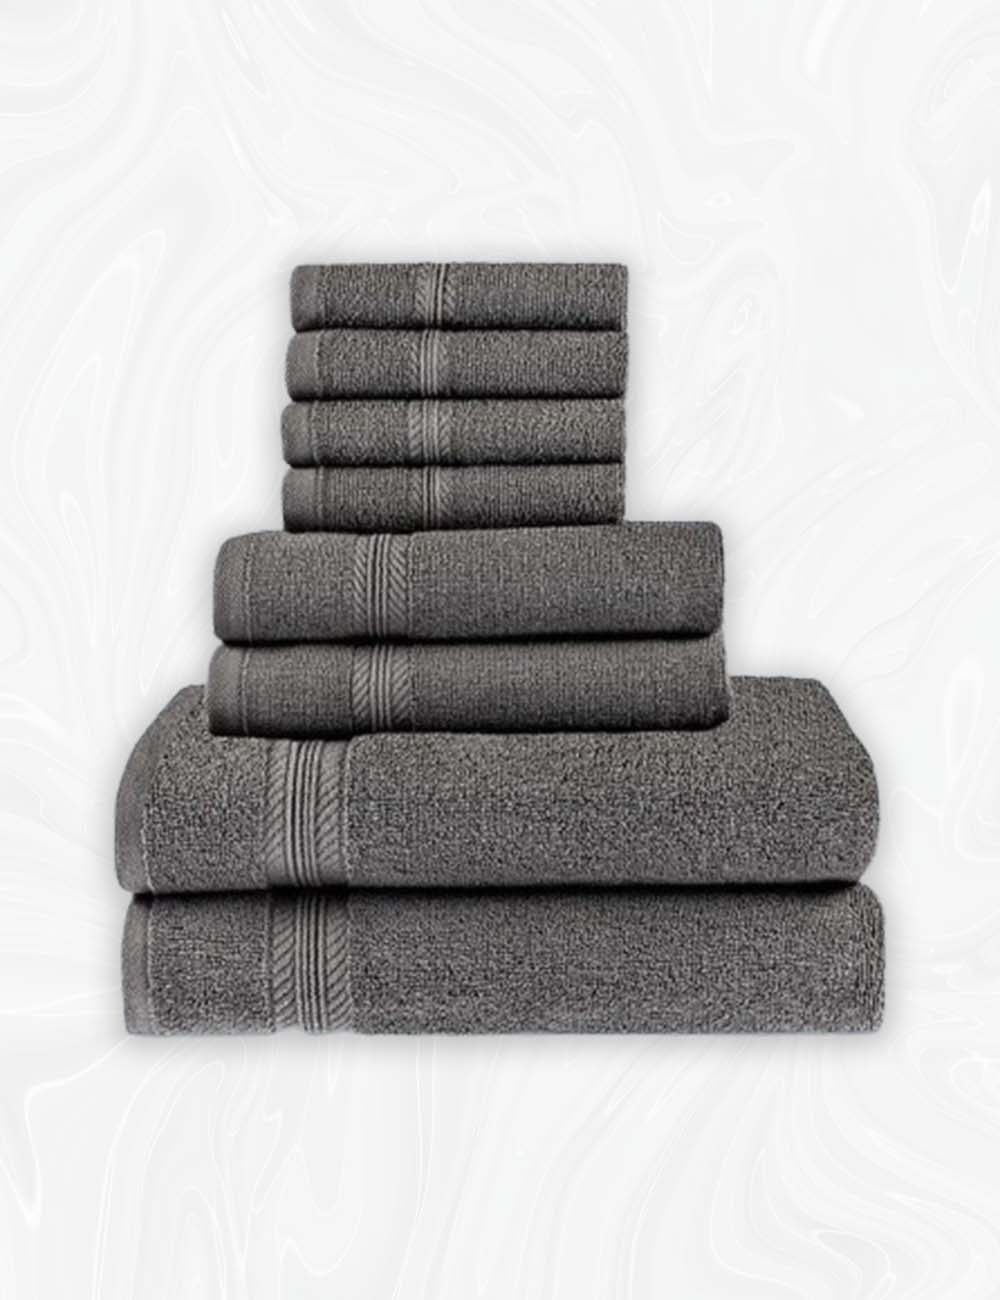 Home Labels 8 Pack Bath Towel Set Grey for Kitchen and Bath - Premium 600 GSM 100% Ring-Spun Cotton 2 Bath Towels, 2 Hand Towels & 4 Washcloths - Quick Dry - Highly Absorbent - Perfect for Daily Use